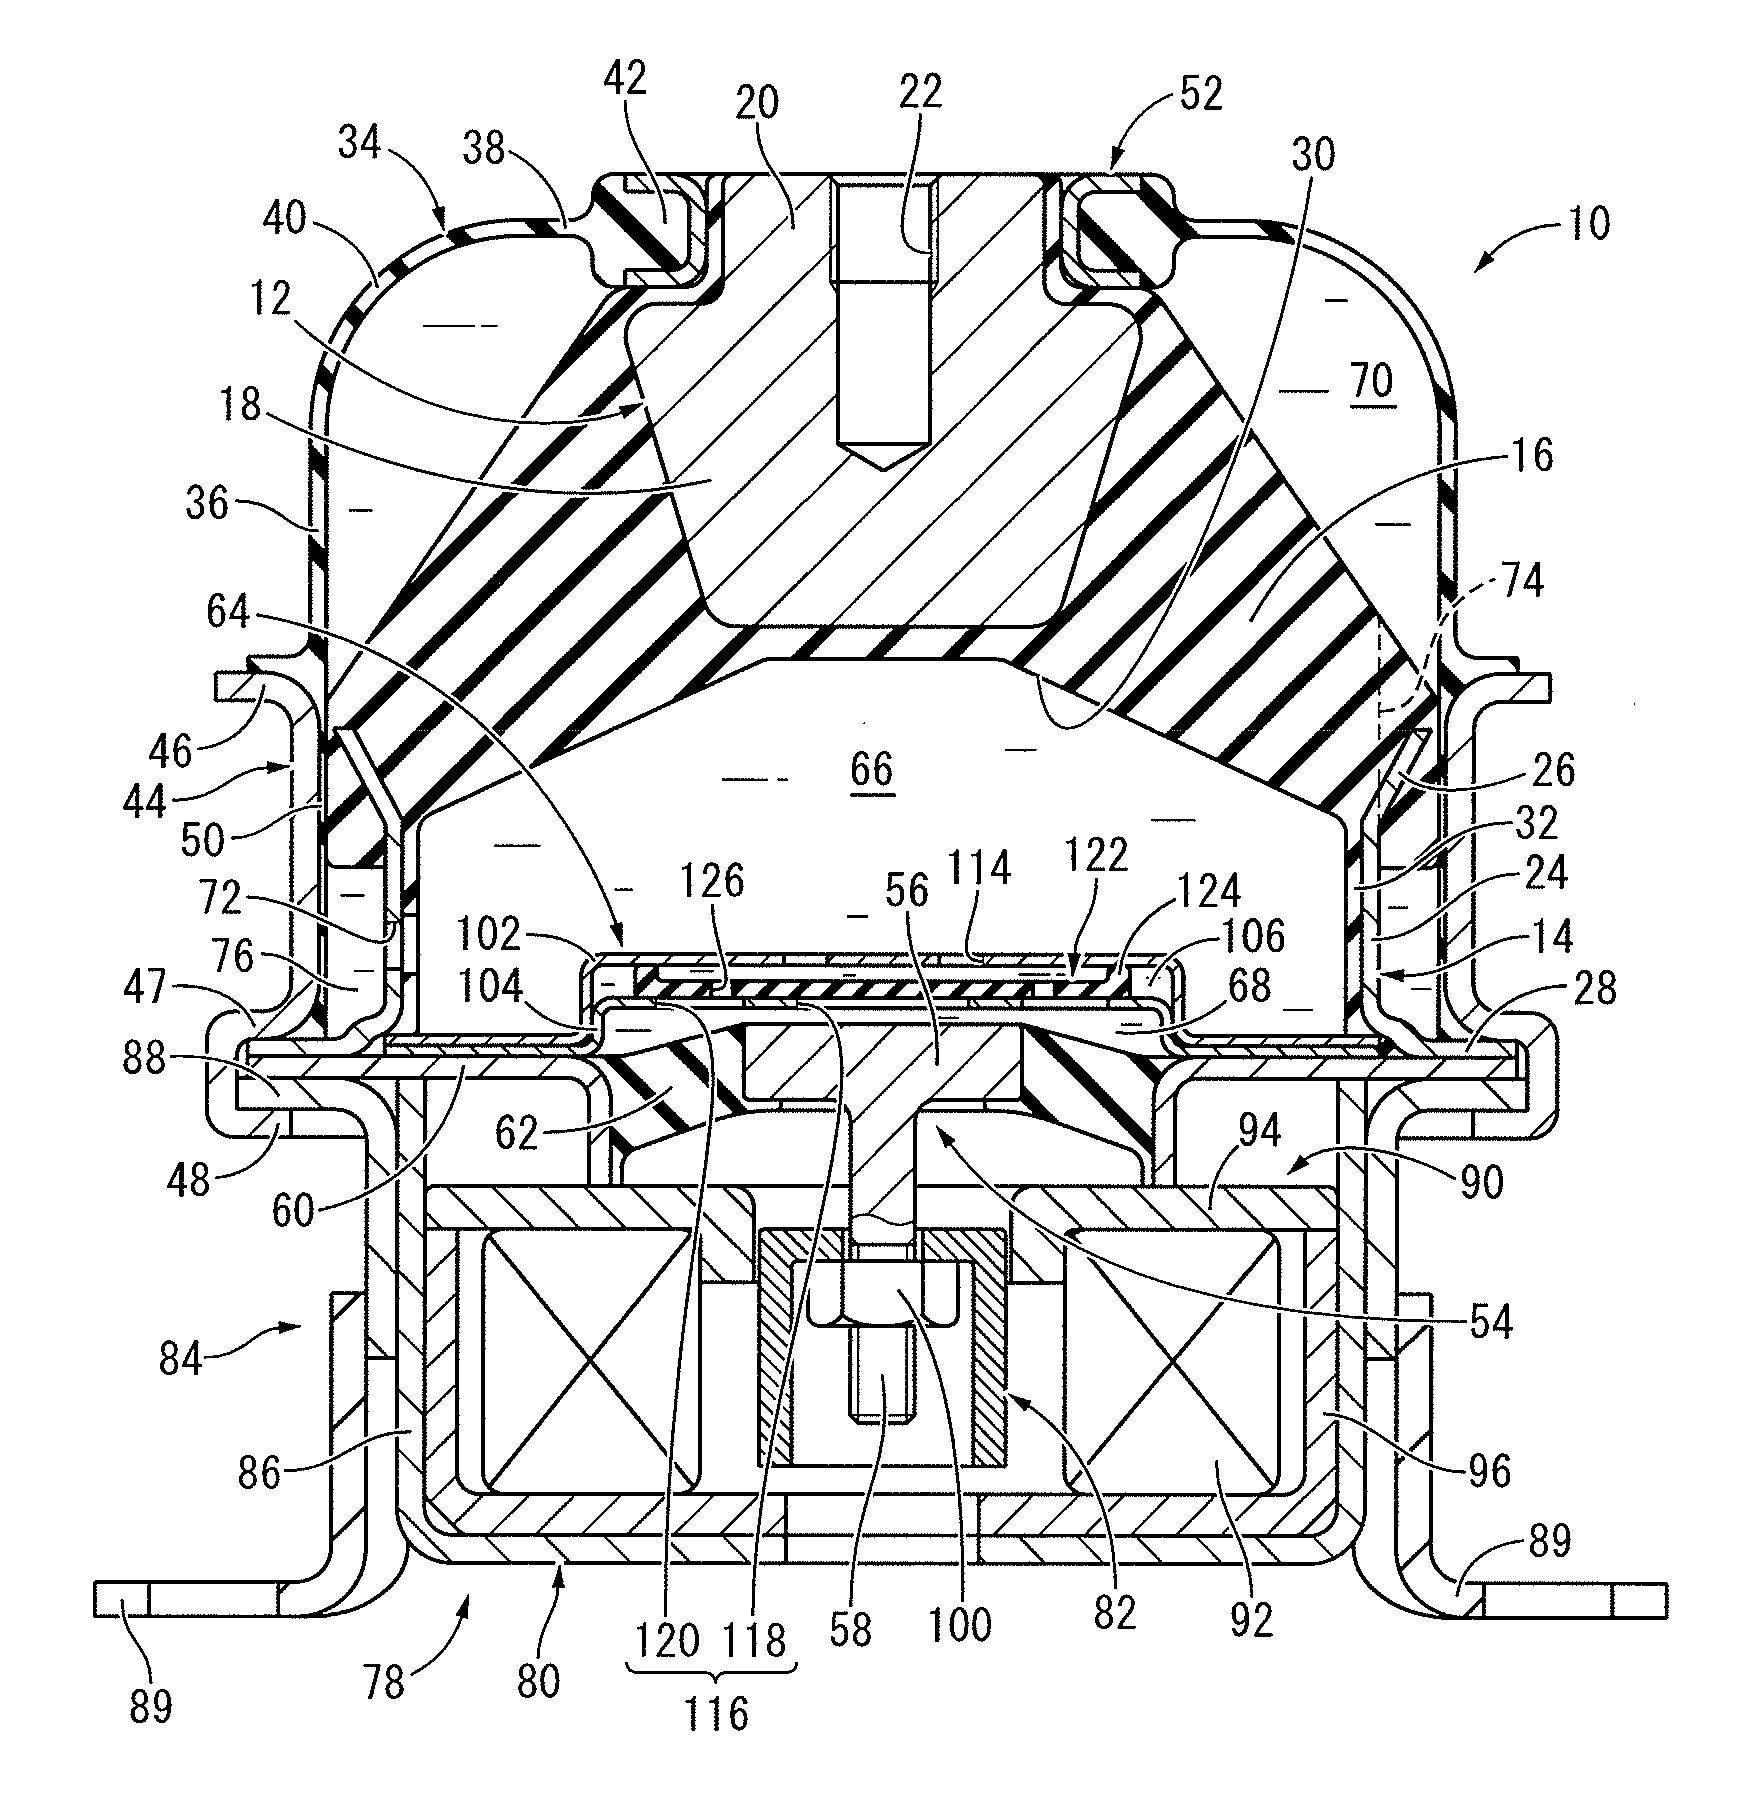 Fluid-filled active vibration-damping device